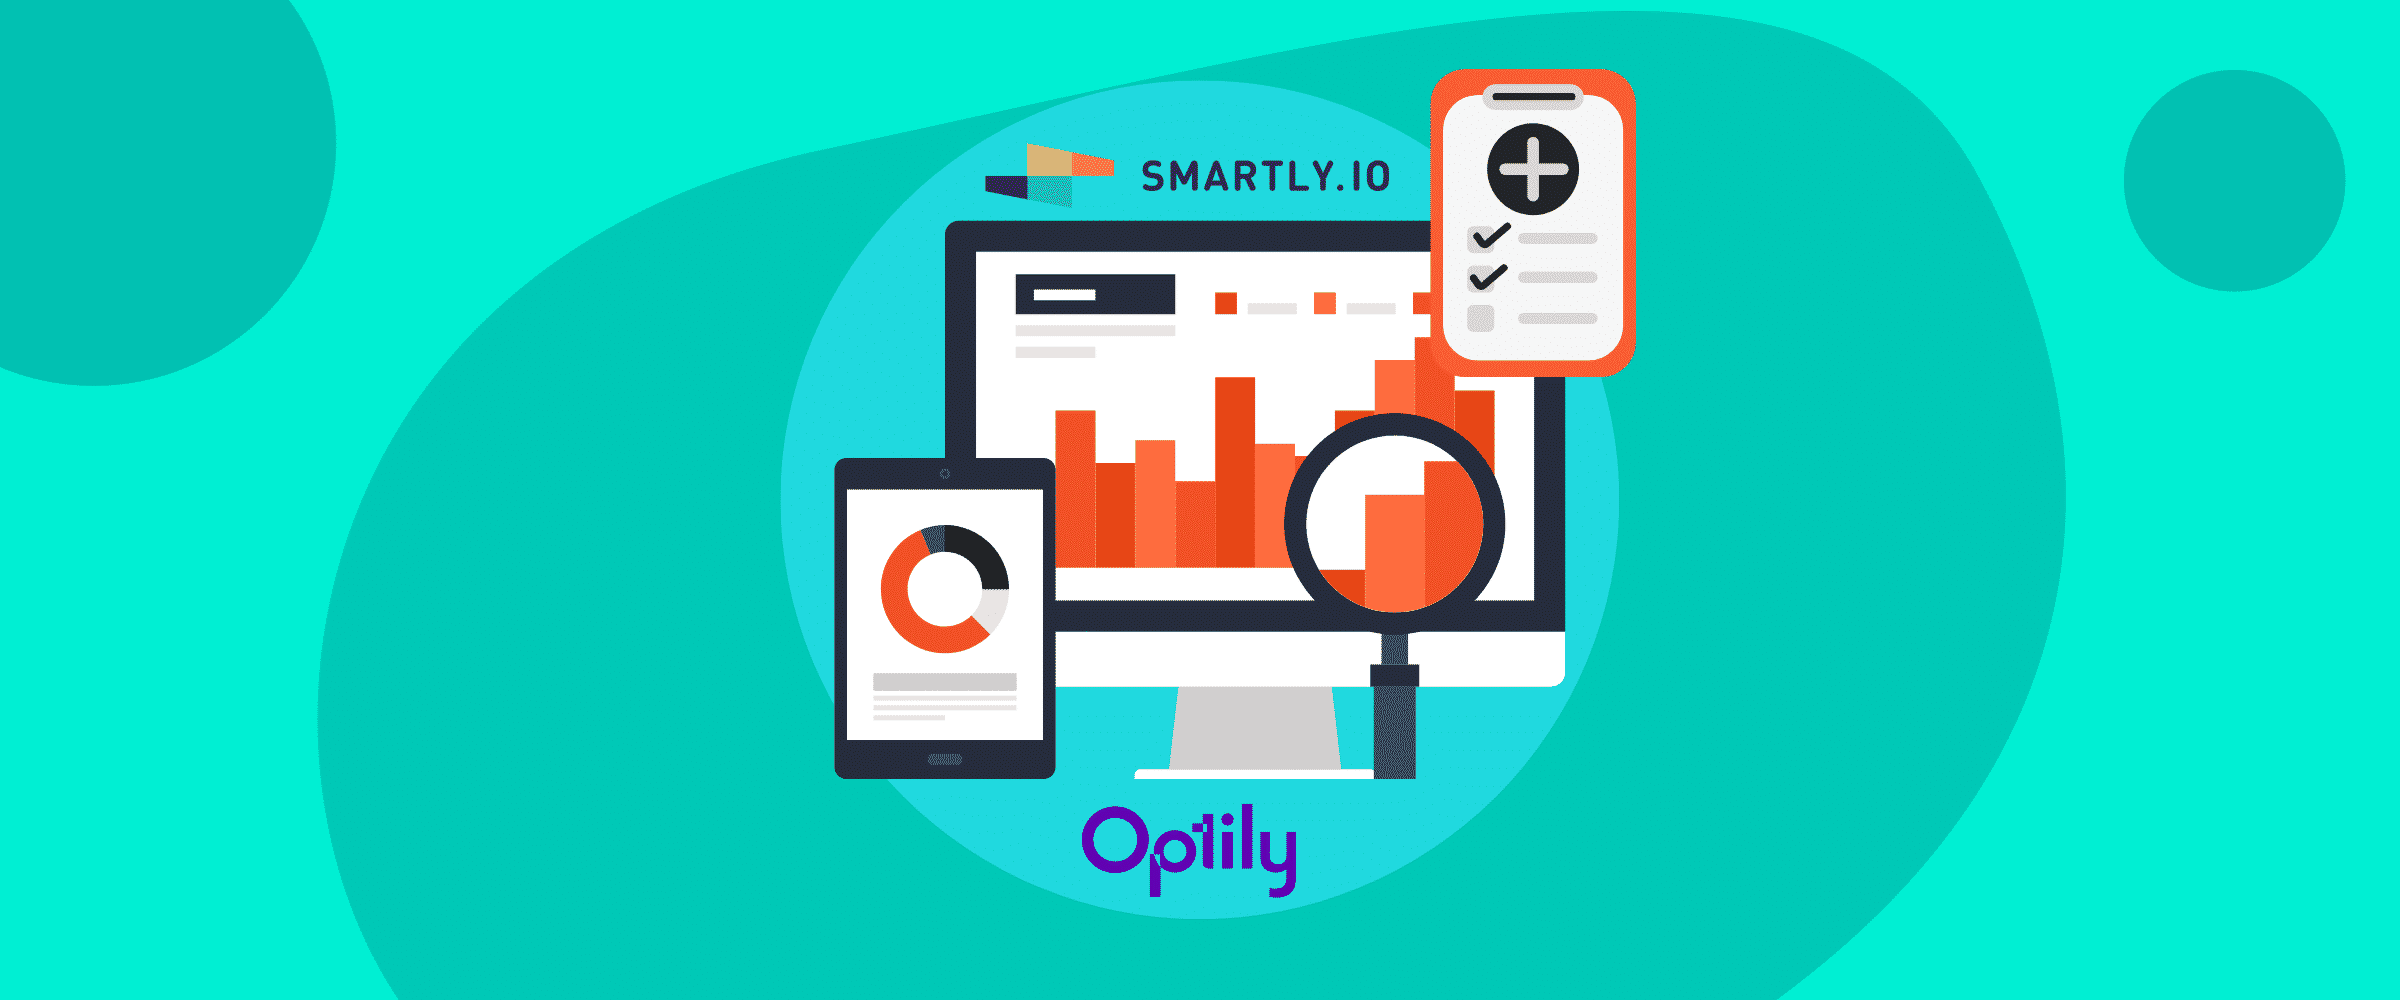 Can Smartly.io optimize ads against multiple KPIs?